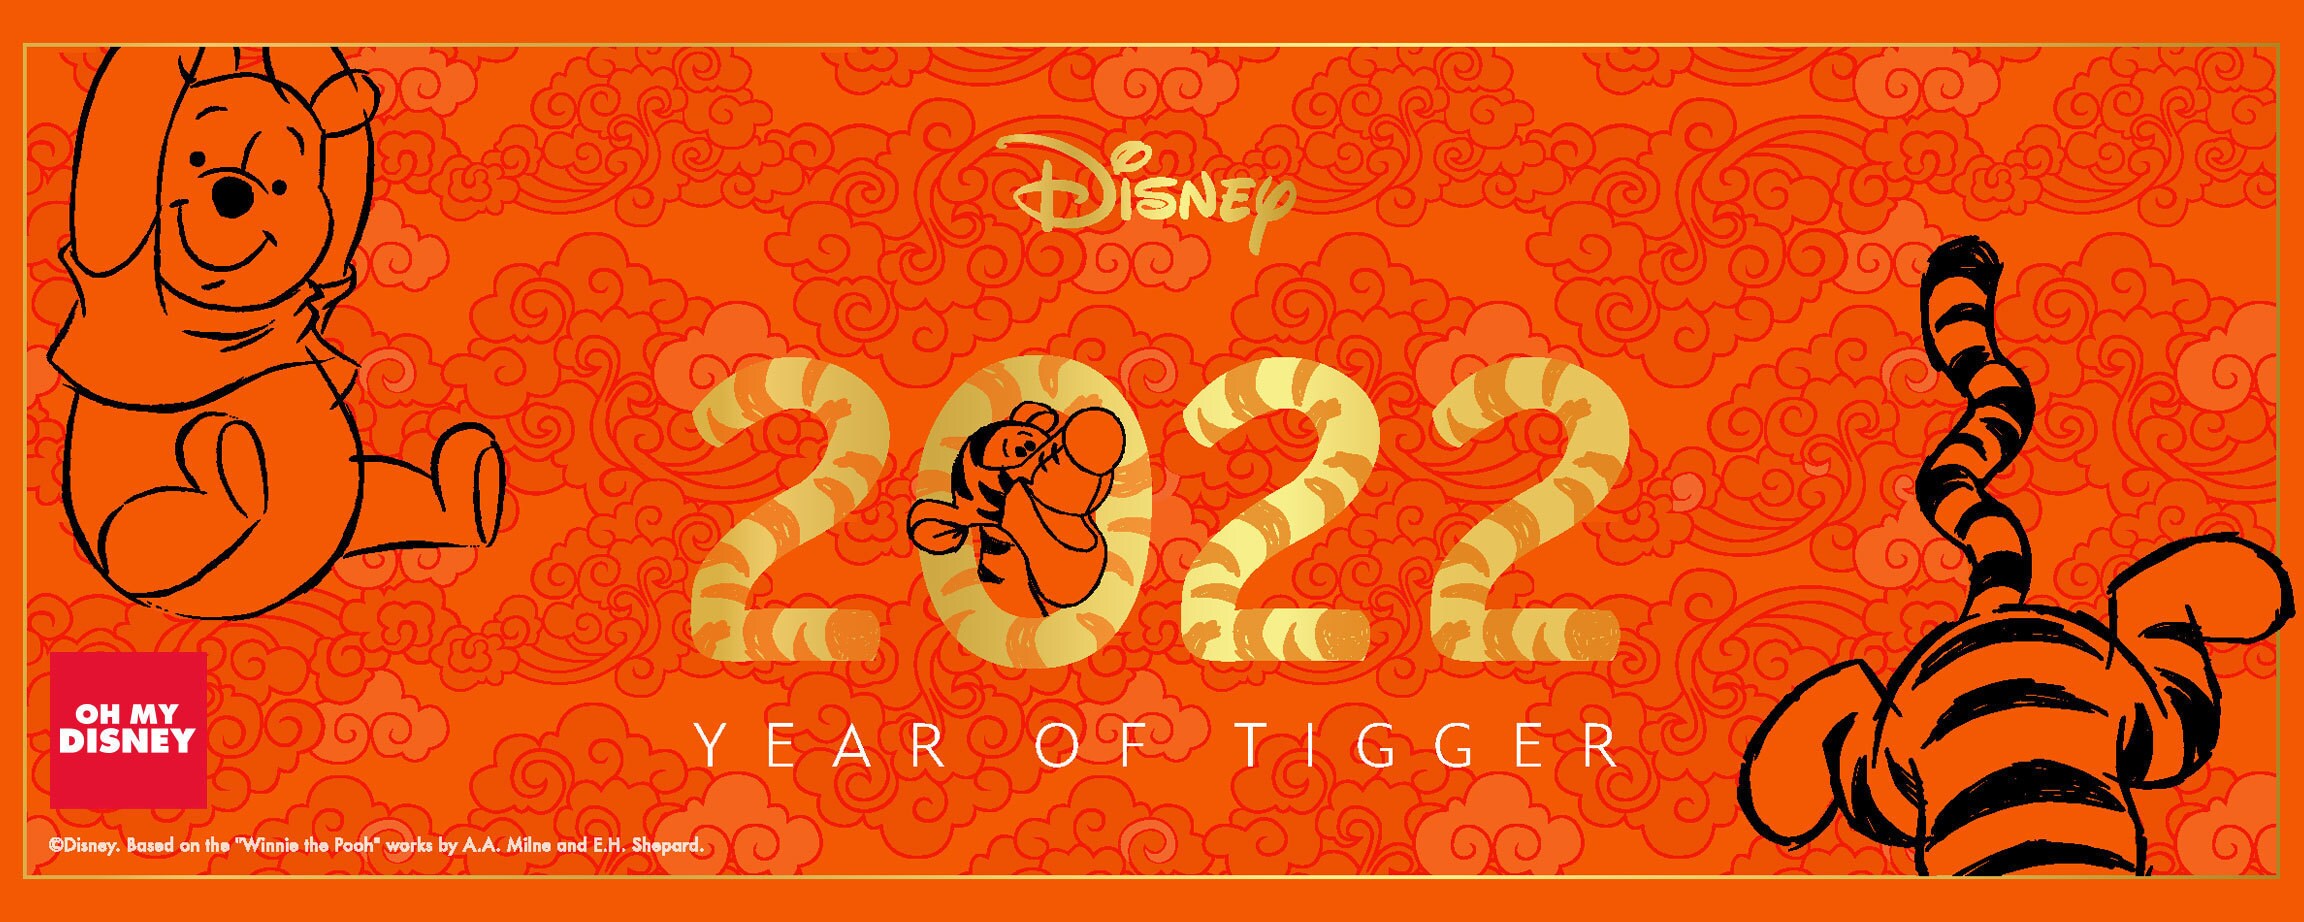 5 Ways To Ring In The Year of the Tiger with Disney!